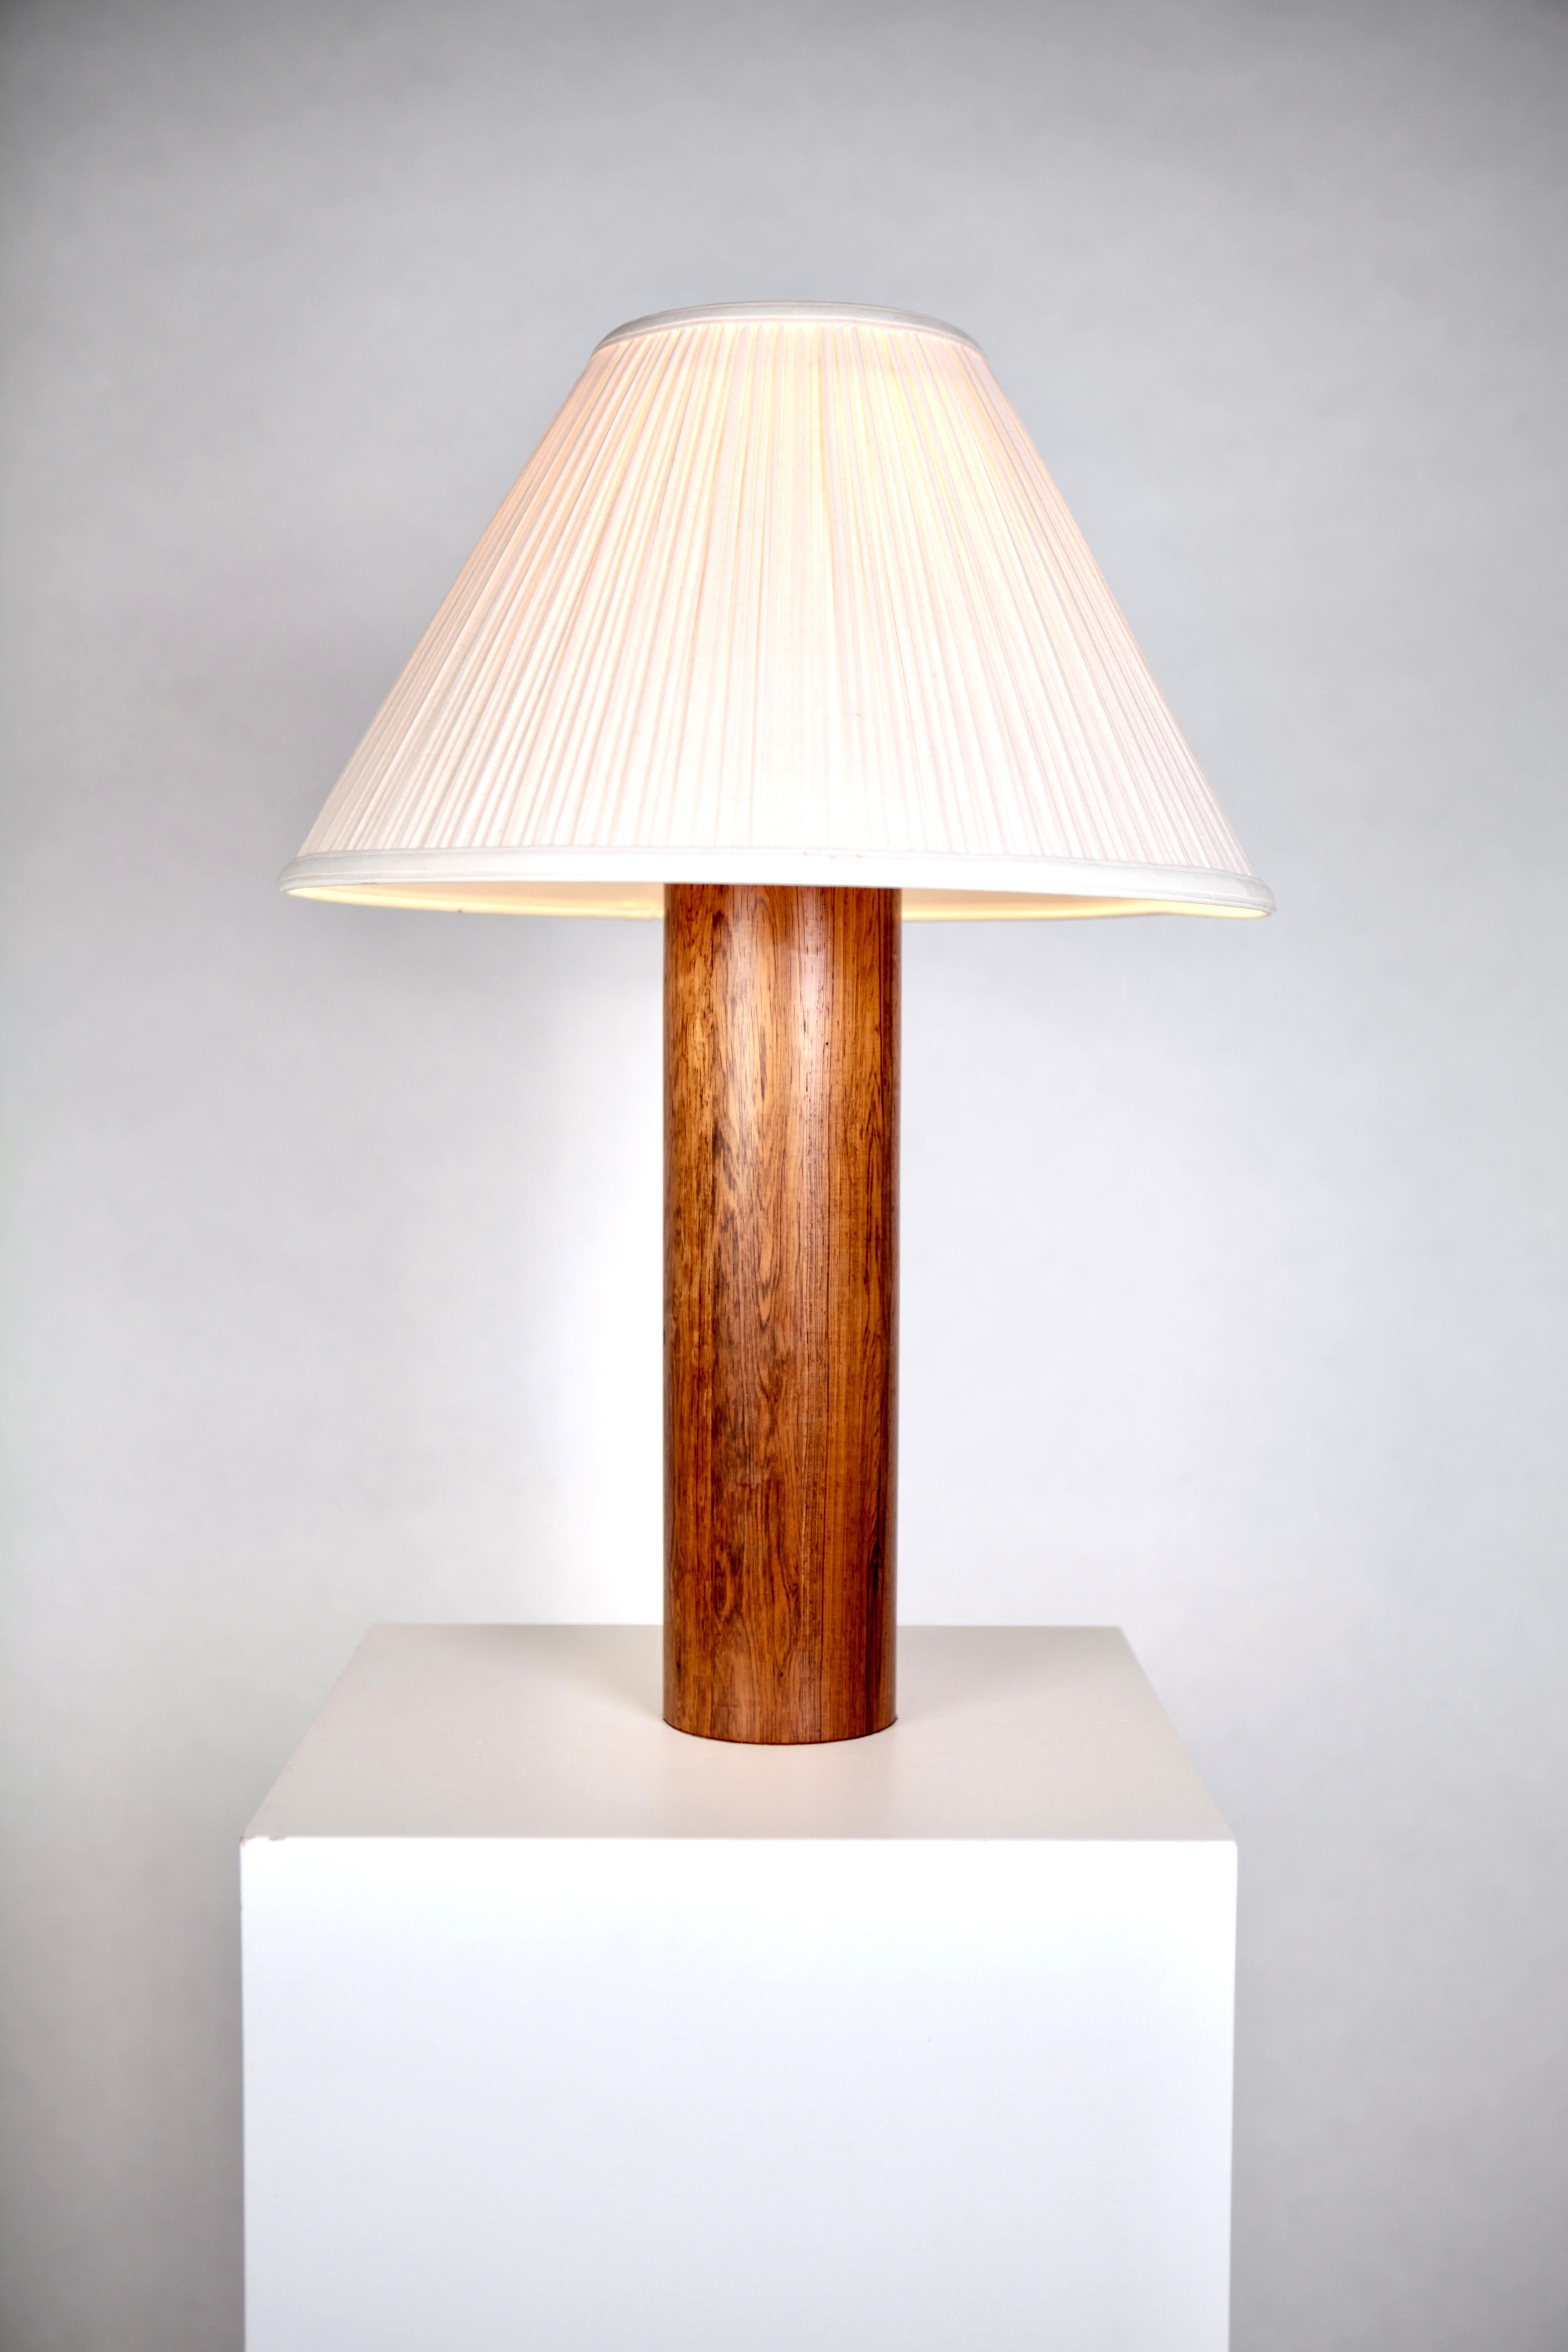 Rare table lamp in natural nordic pine, designed by Uno Kristiansson for Luxus in Sweden in 1970. Original linen shade & shade holder.
Great vintage condition.